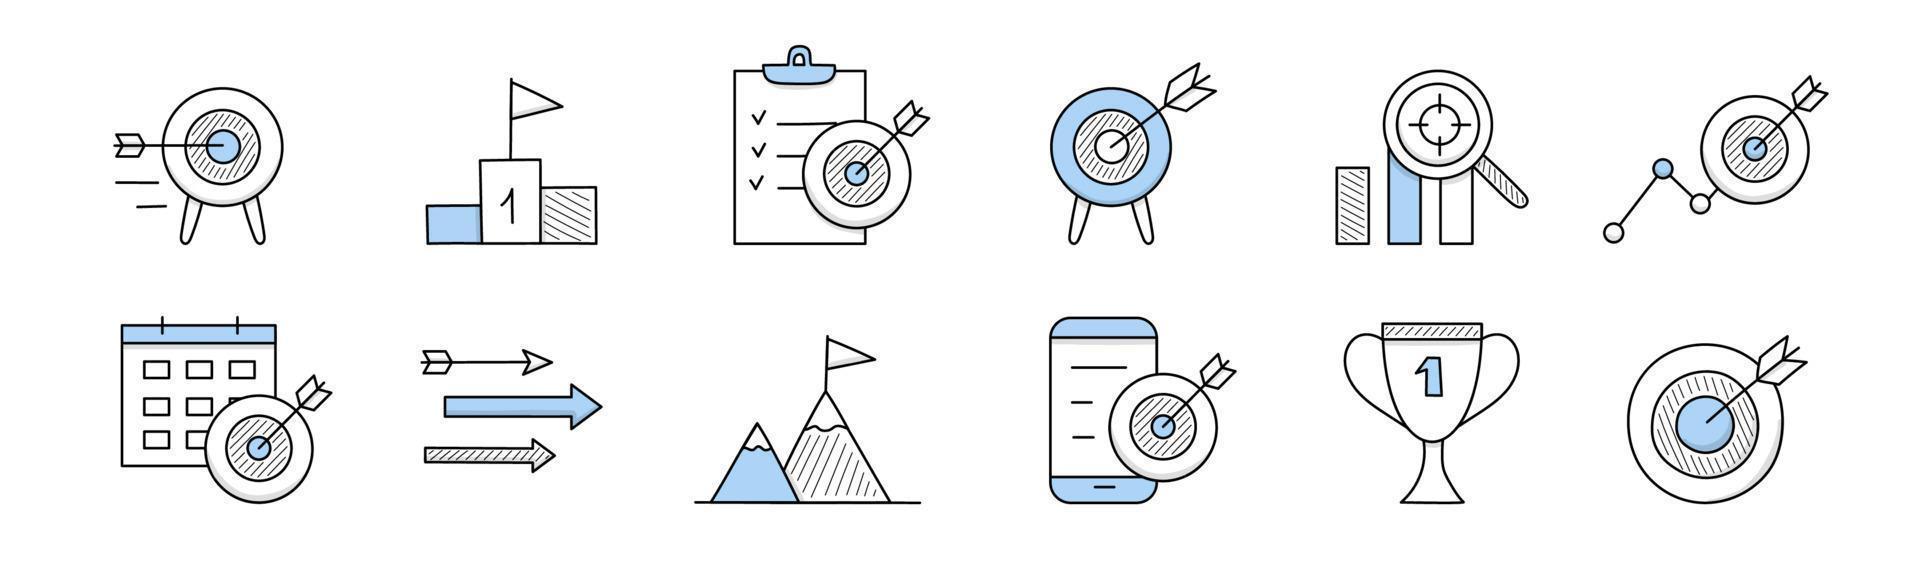 Business goal doodle icons, isolated elements set vector